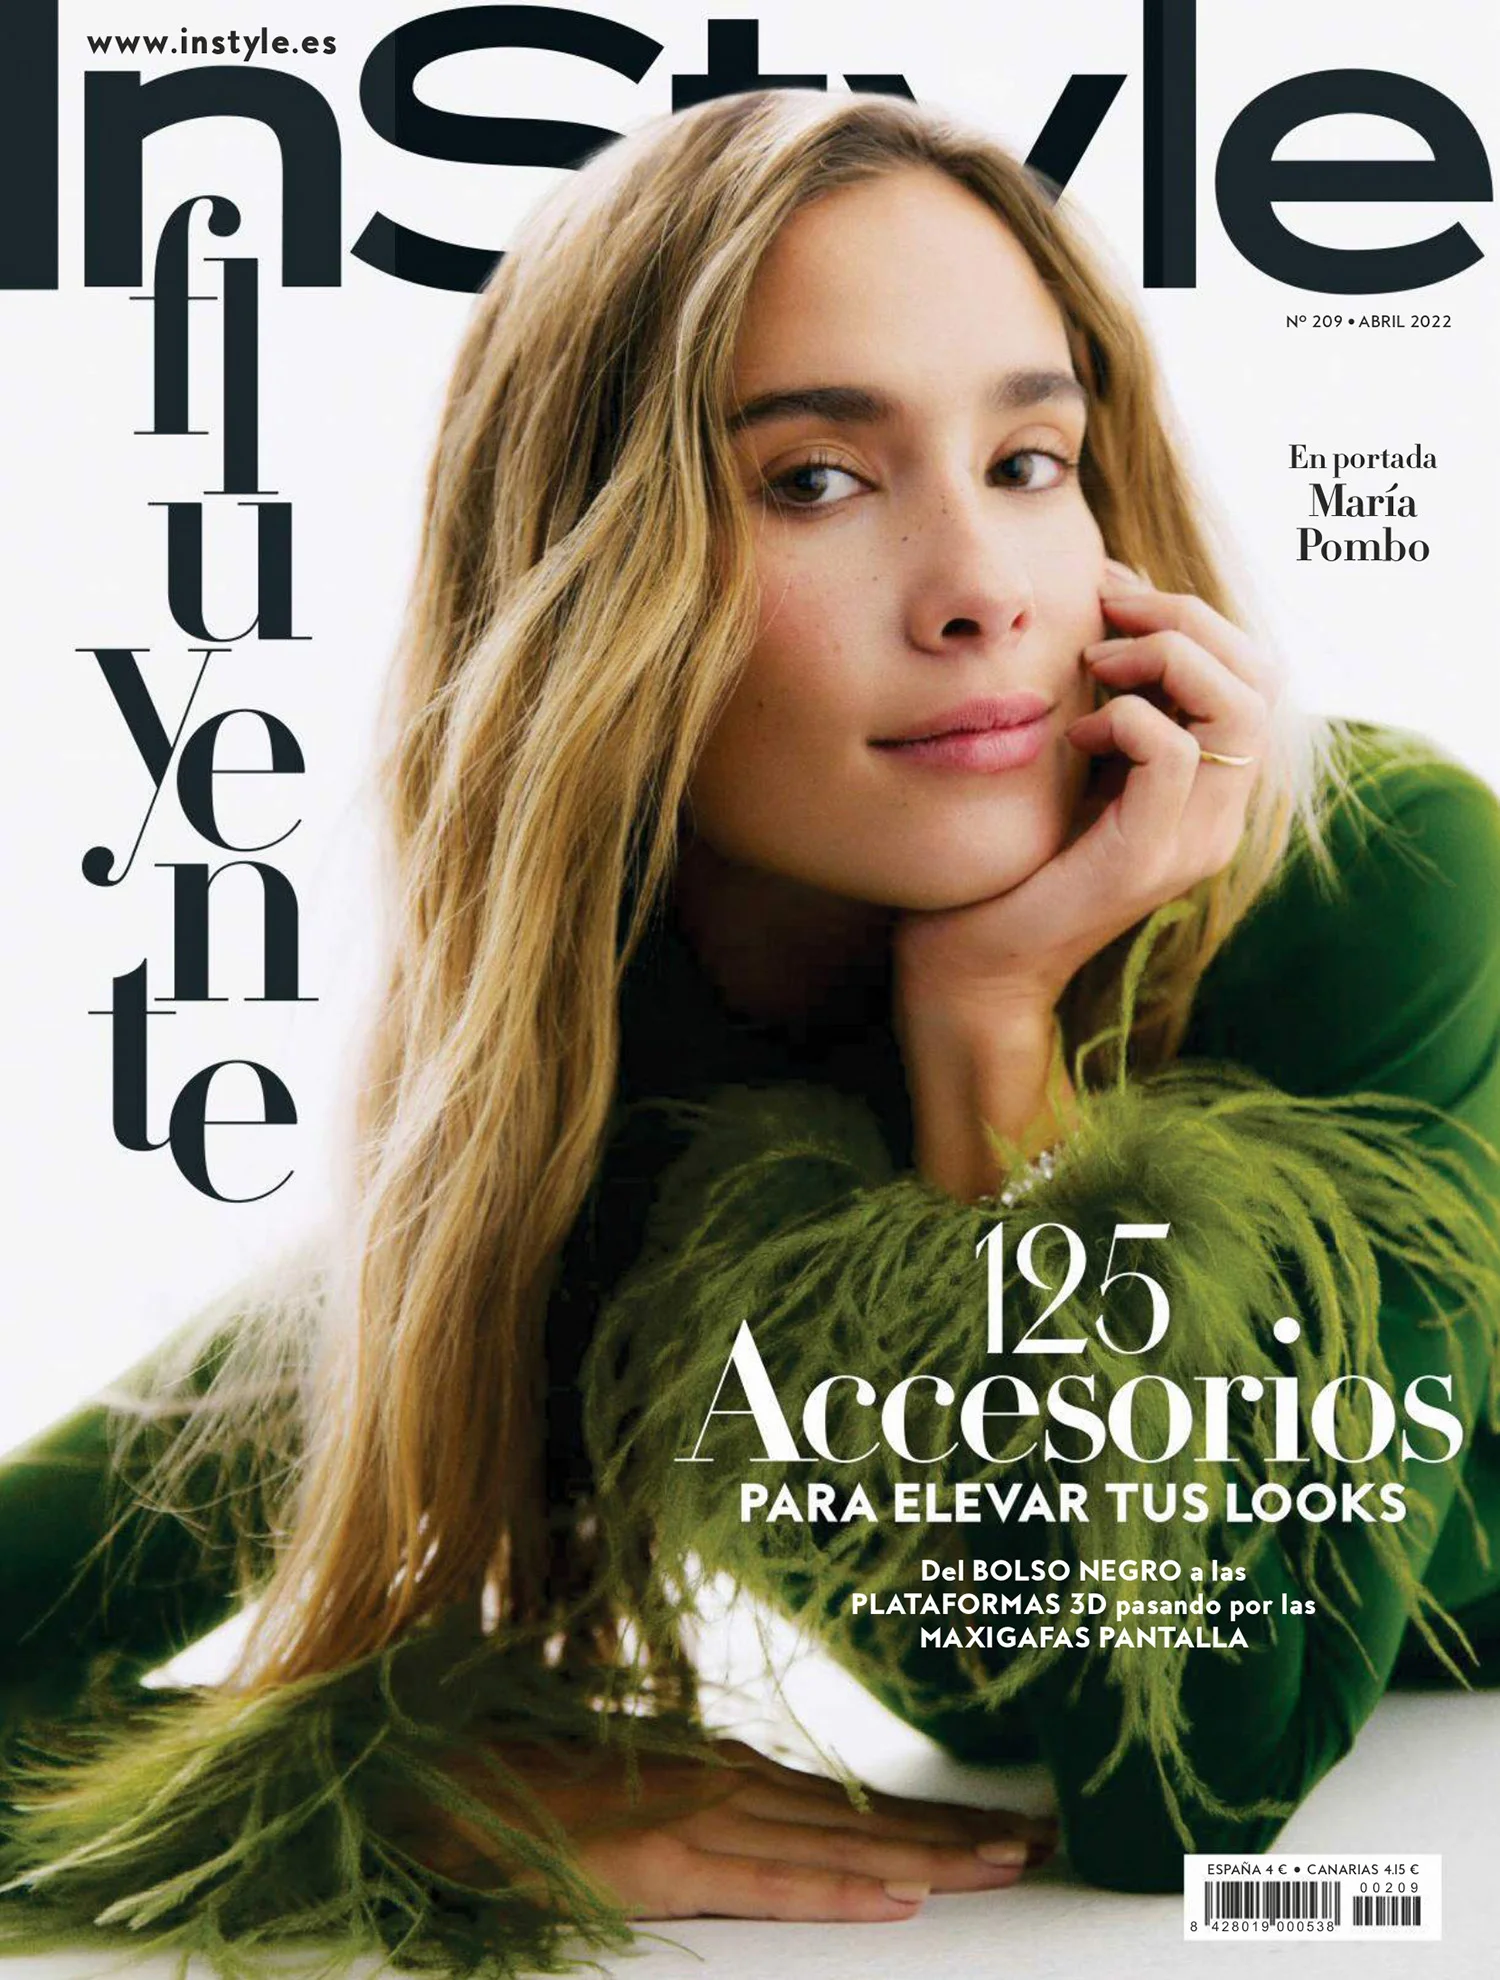 María Pombo covers InStyle Spain April 2022 by Javier Biosca